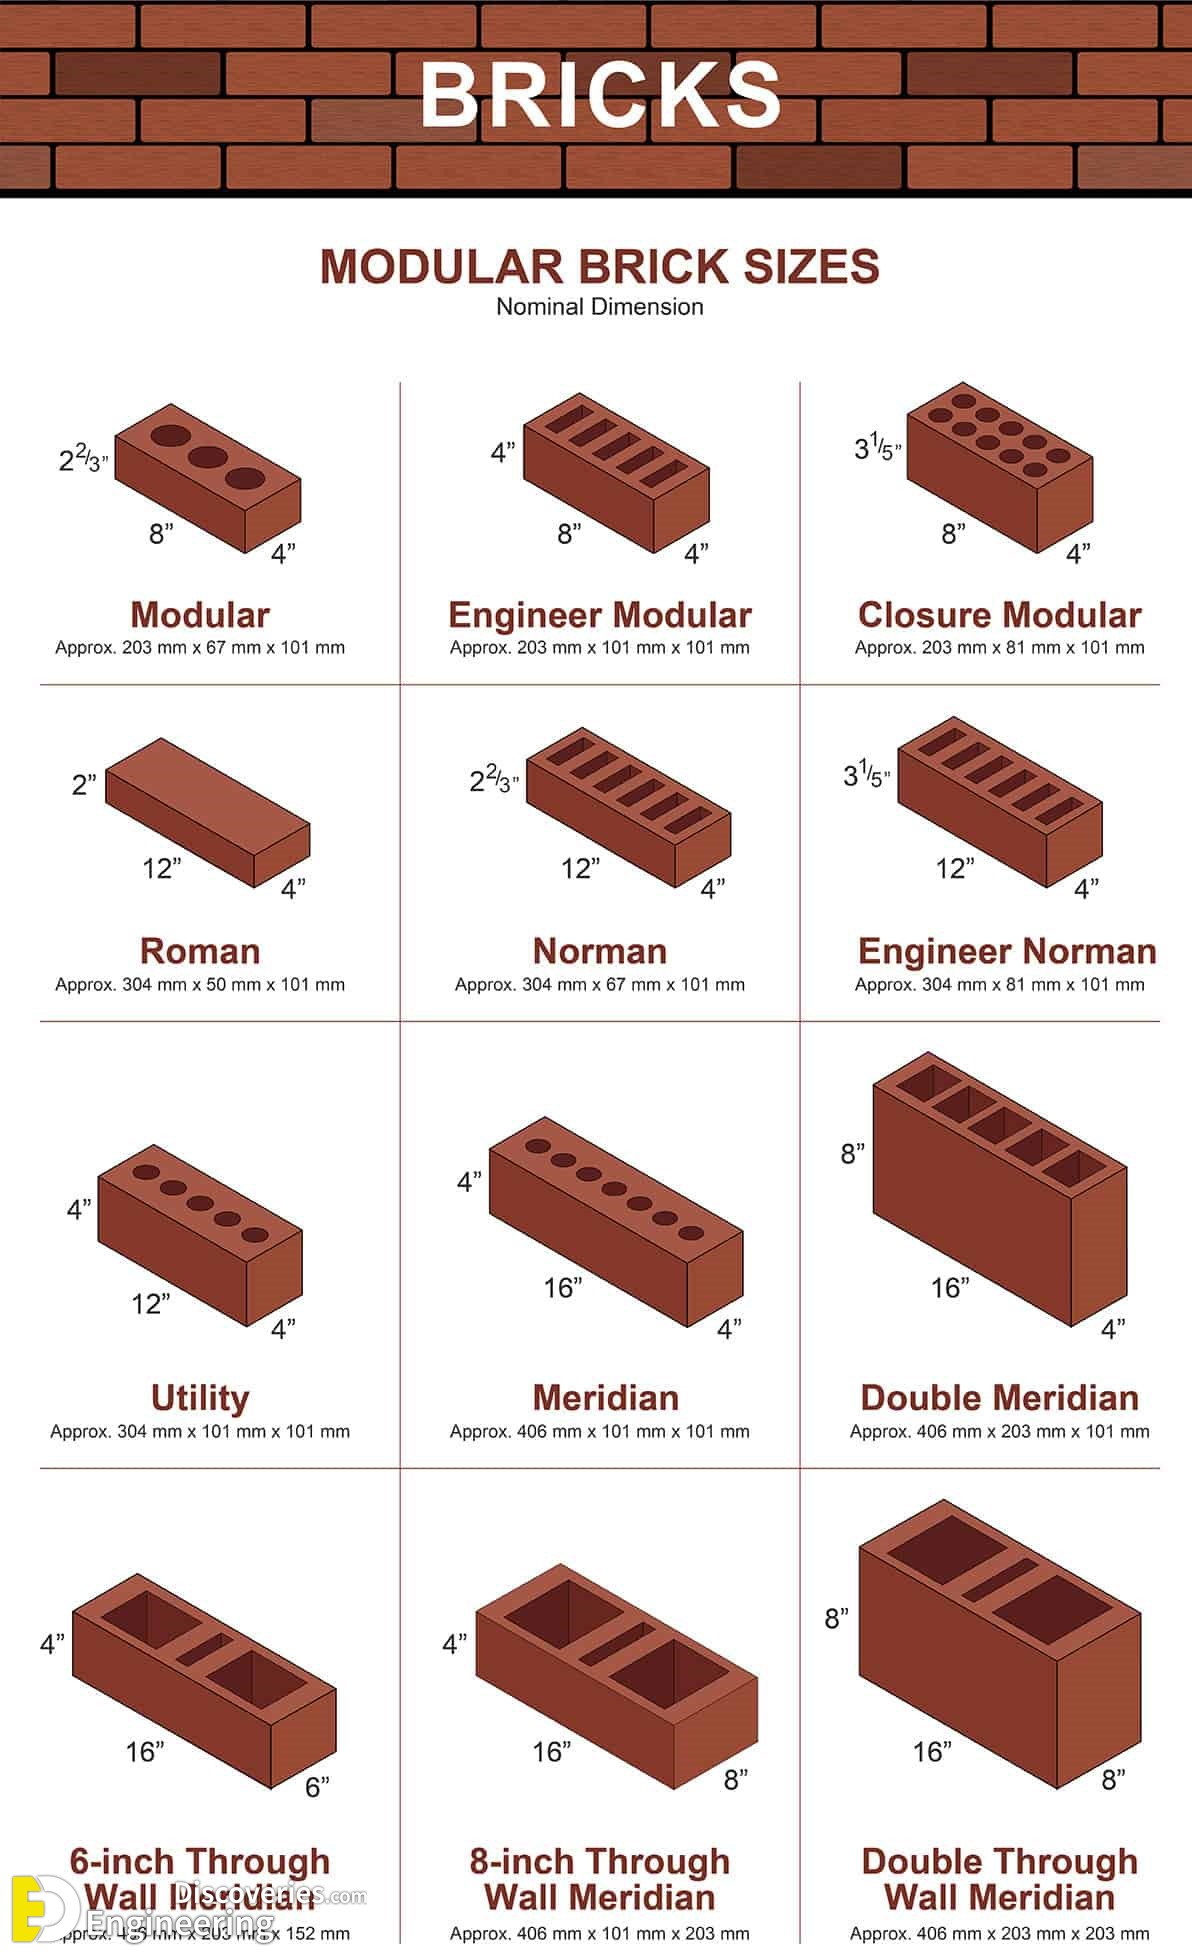 5 Different Types of Bricks for Building Construction (with Images)